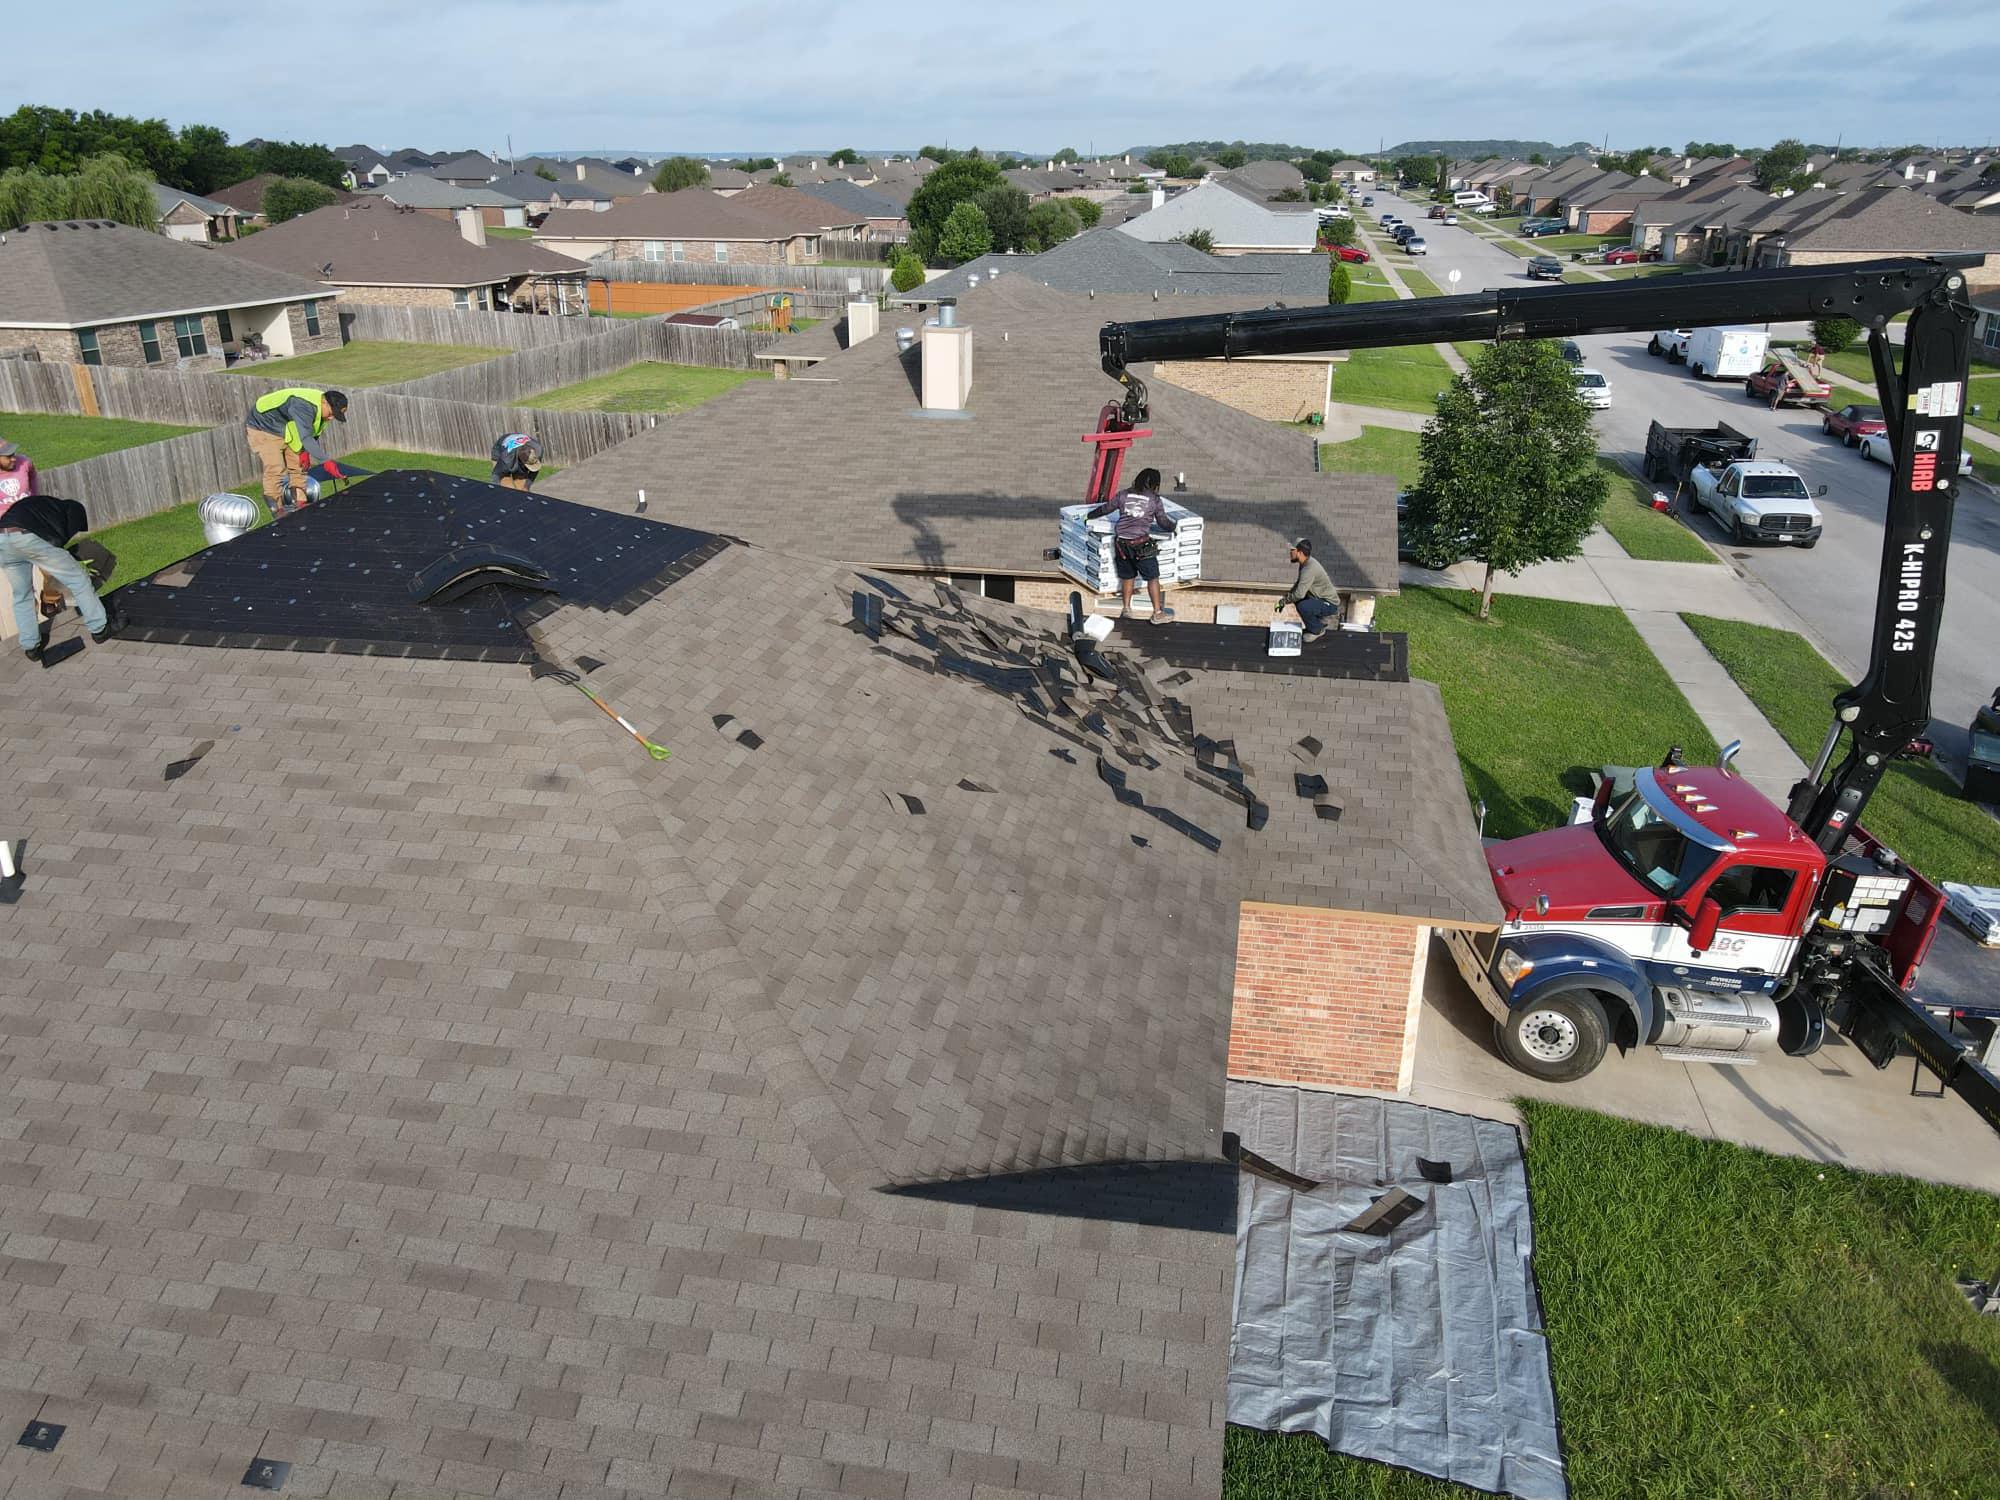 Get rid of your leaky roof! Call our roofers!